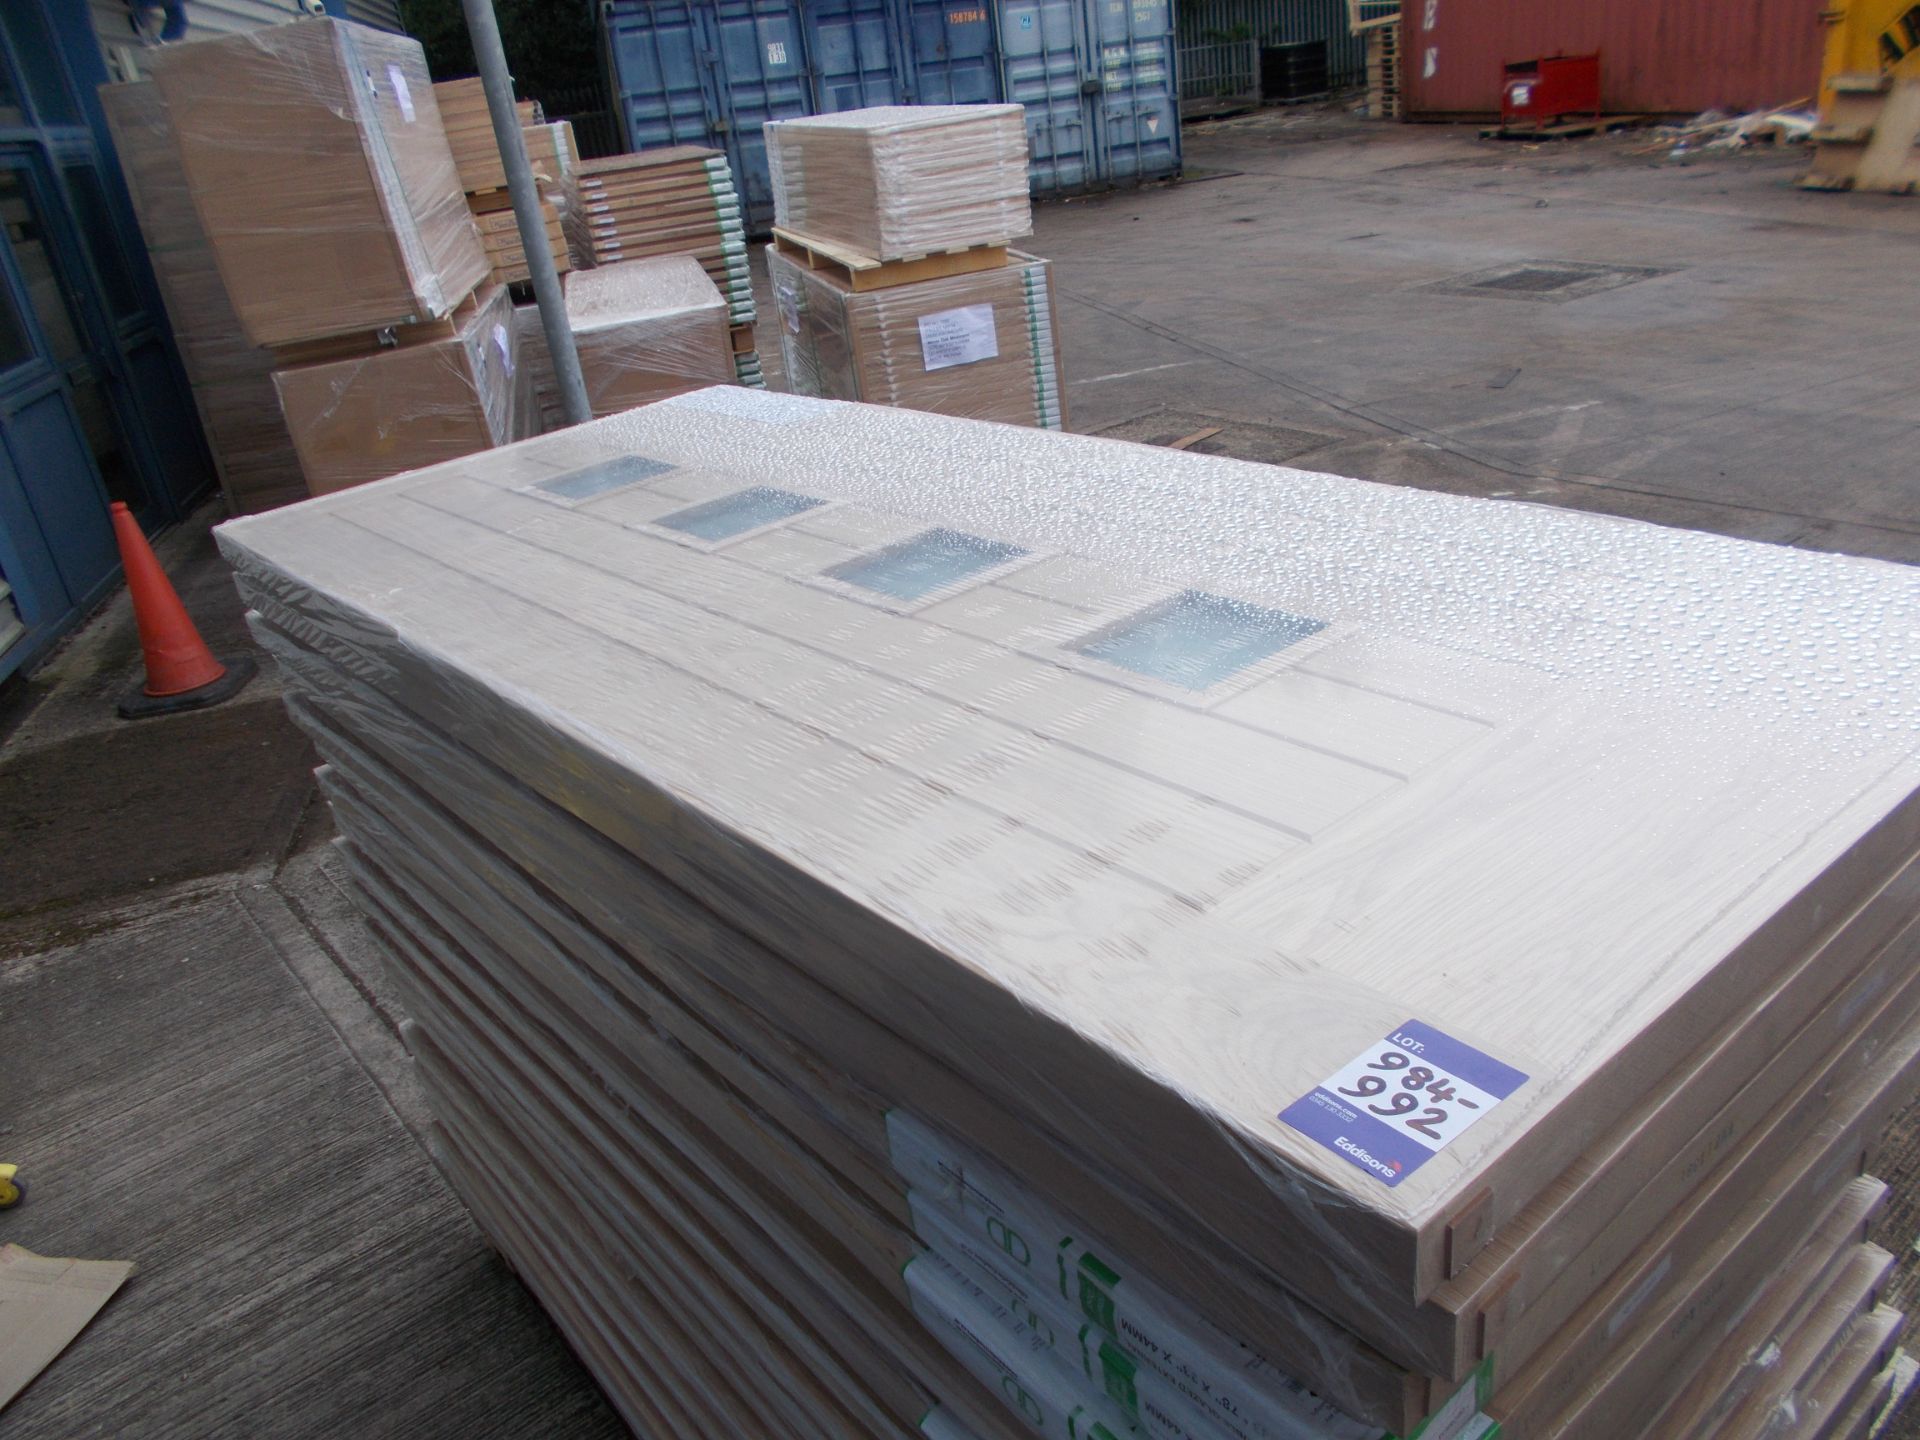 2 x Siena Satin Double Glazed DGOSIE33 External Door 78”x33”x44mm - Lots to be handed out in order